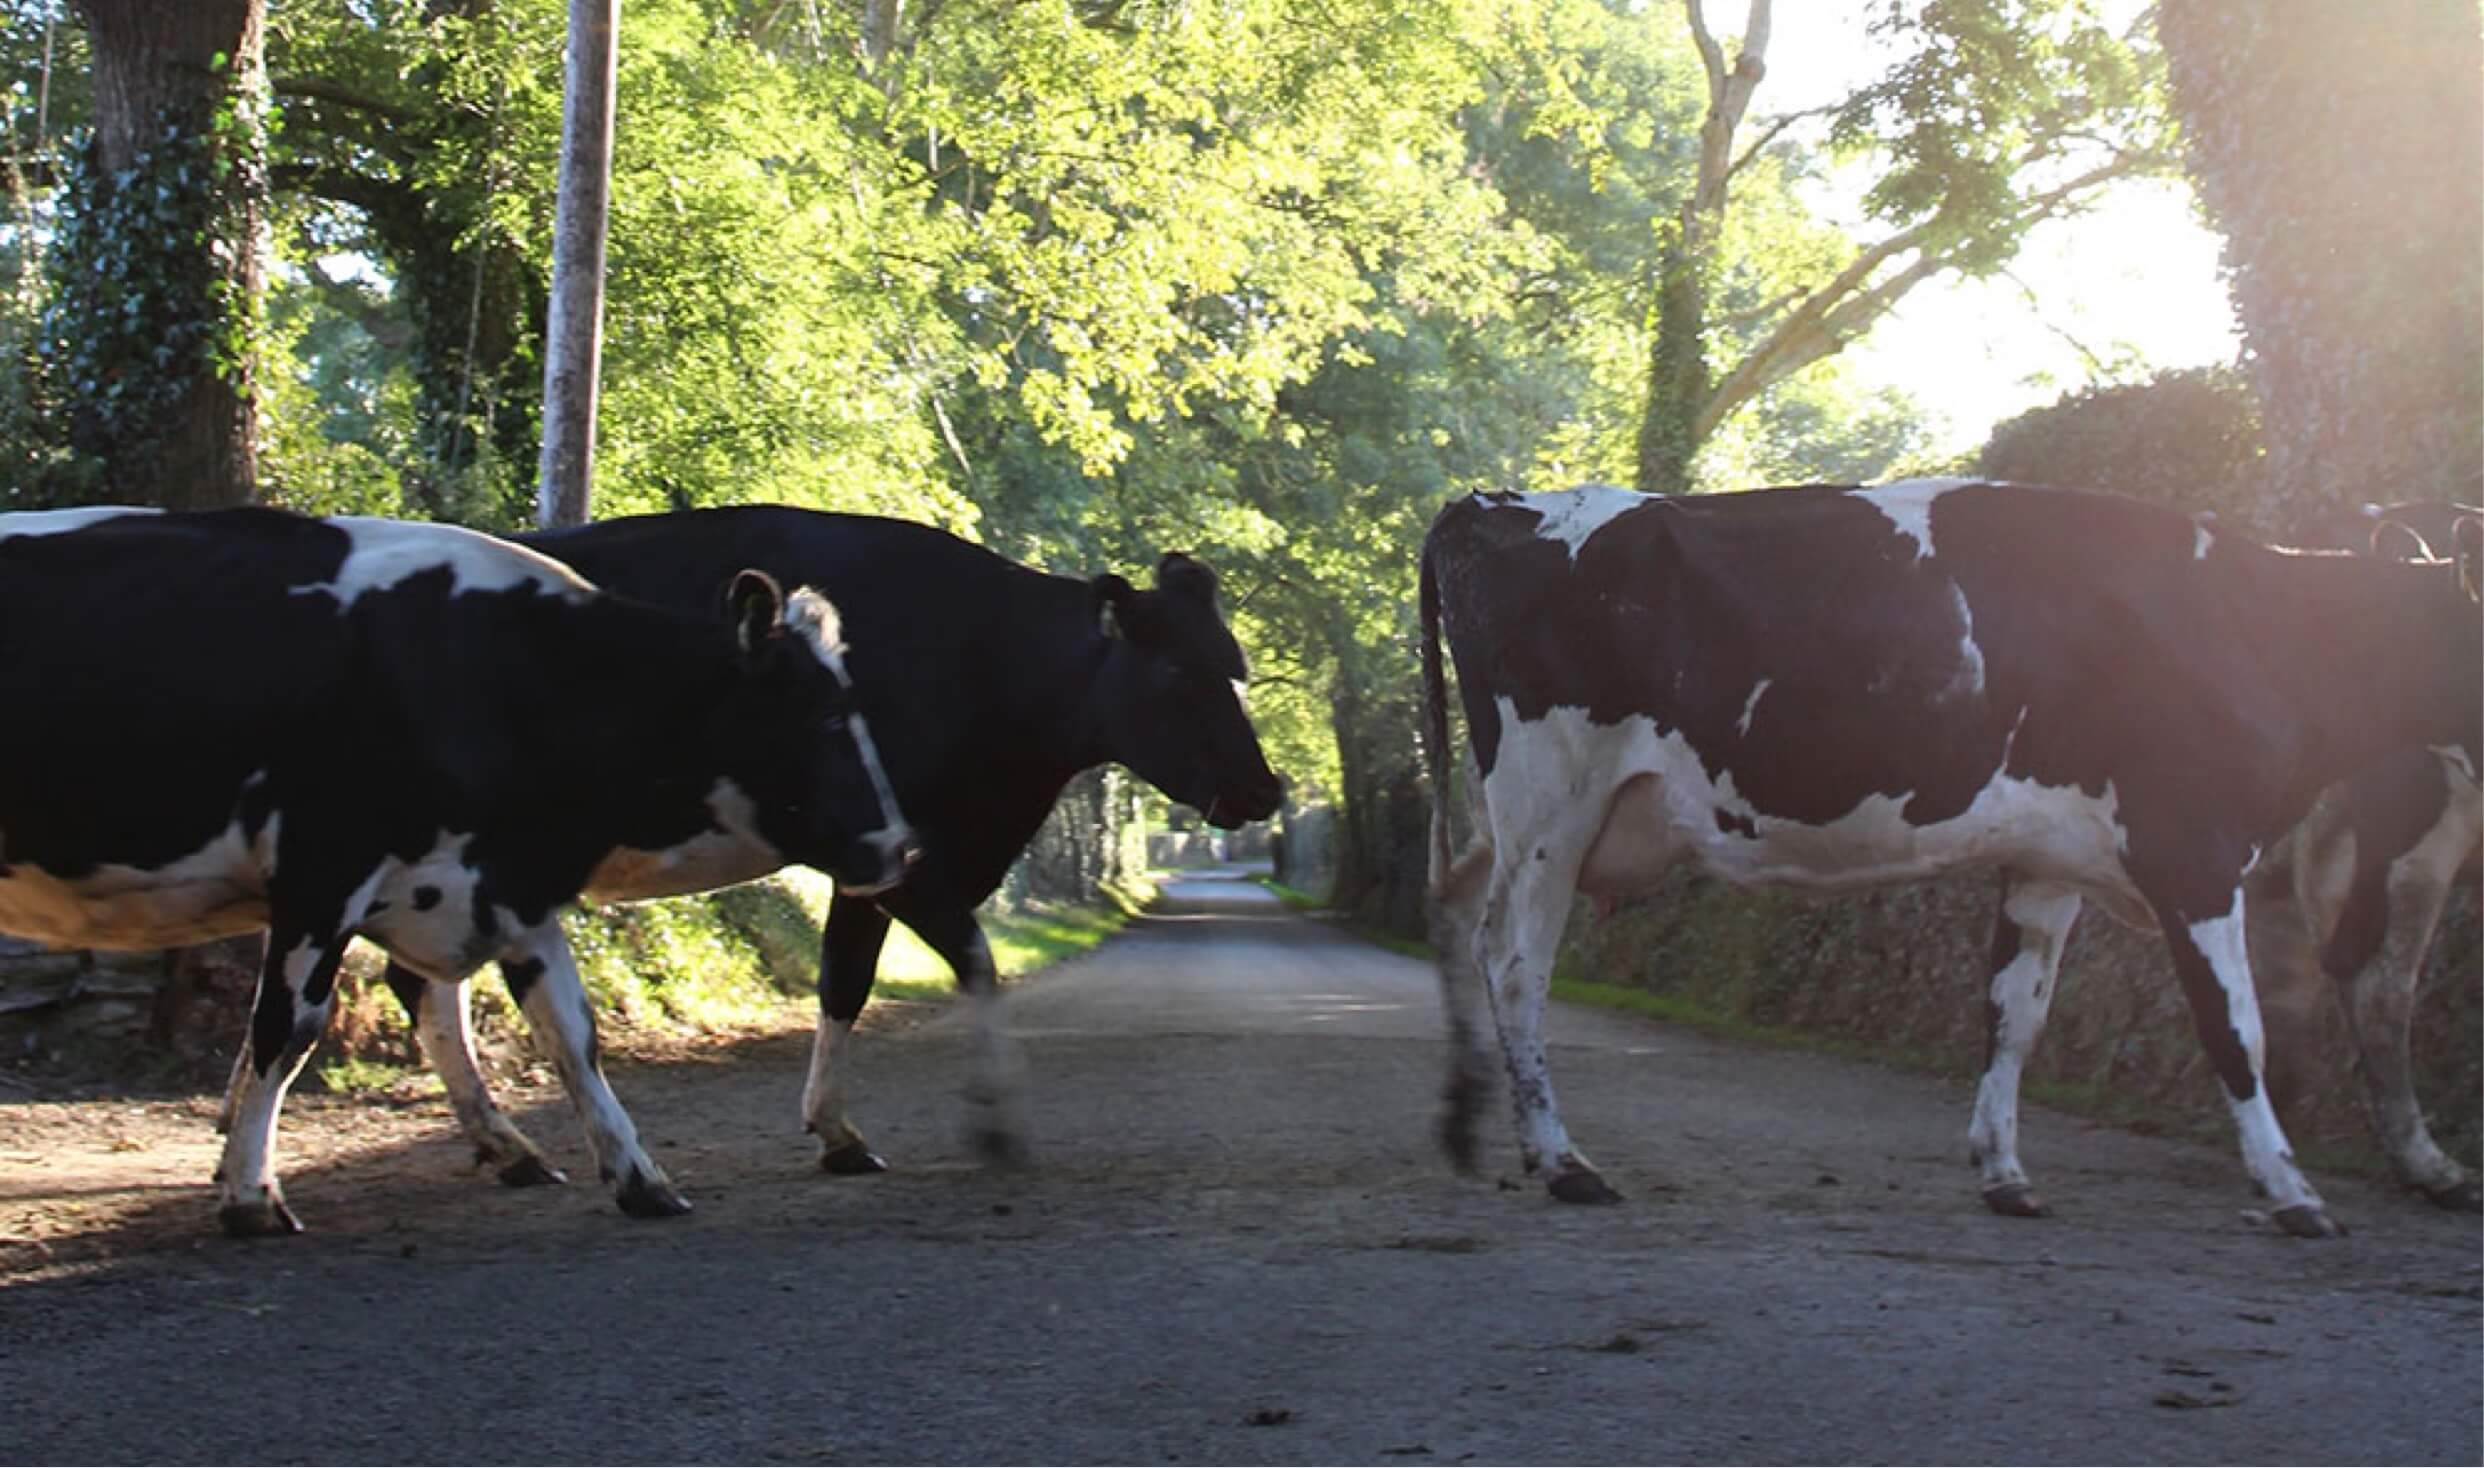 Three cows crossing a county road shaded by tall tress overhead